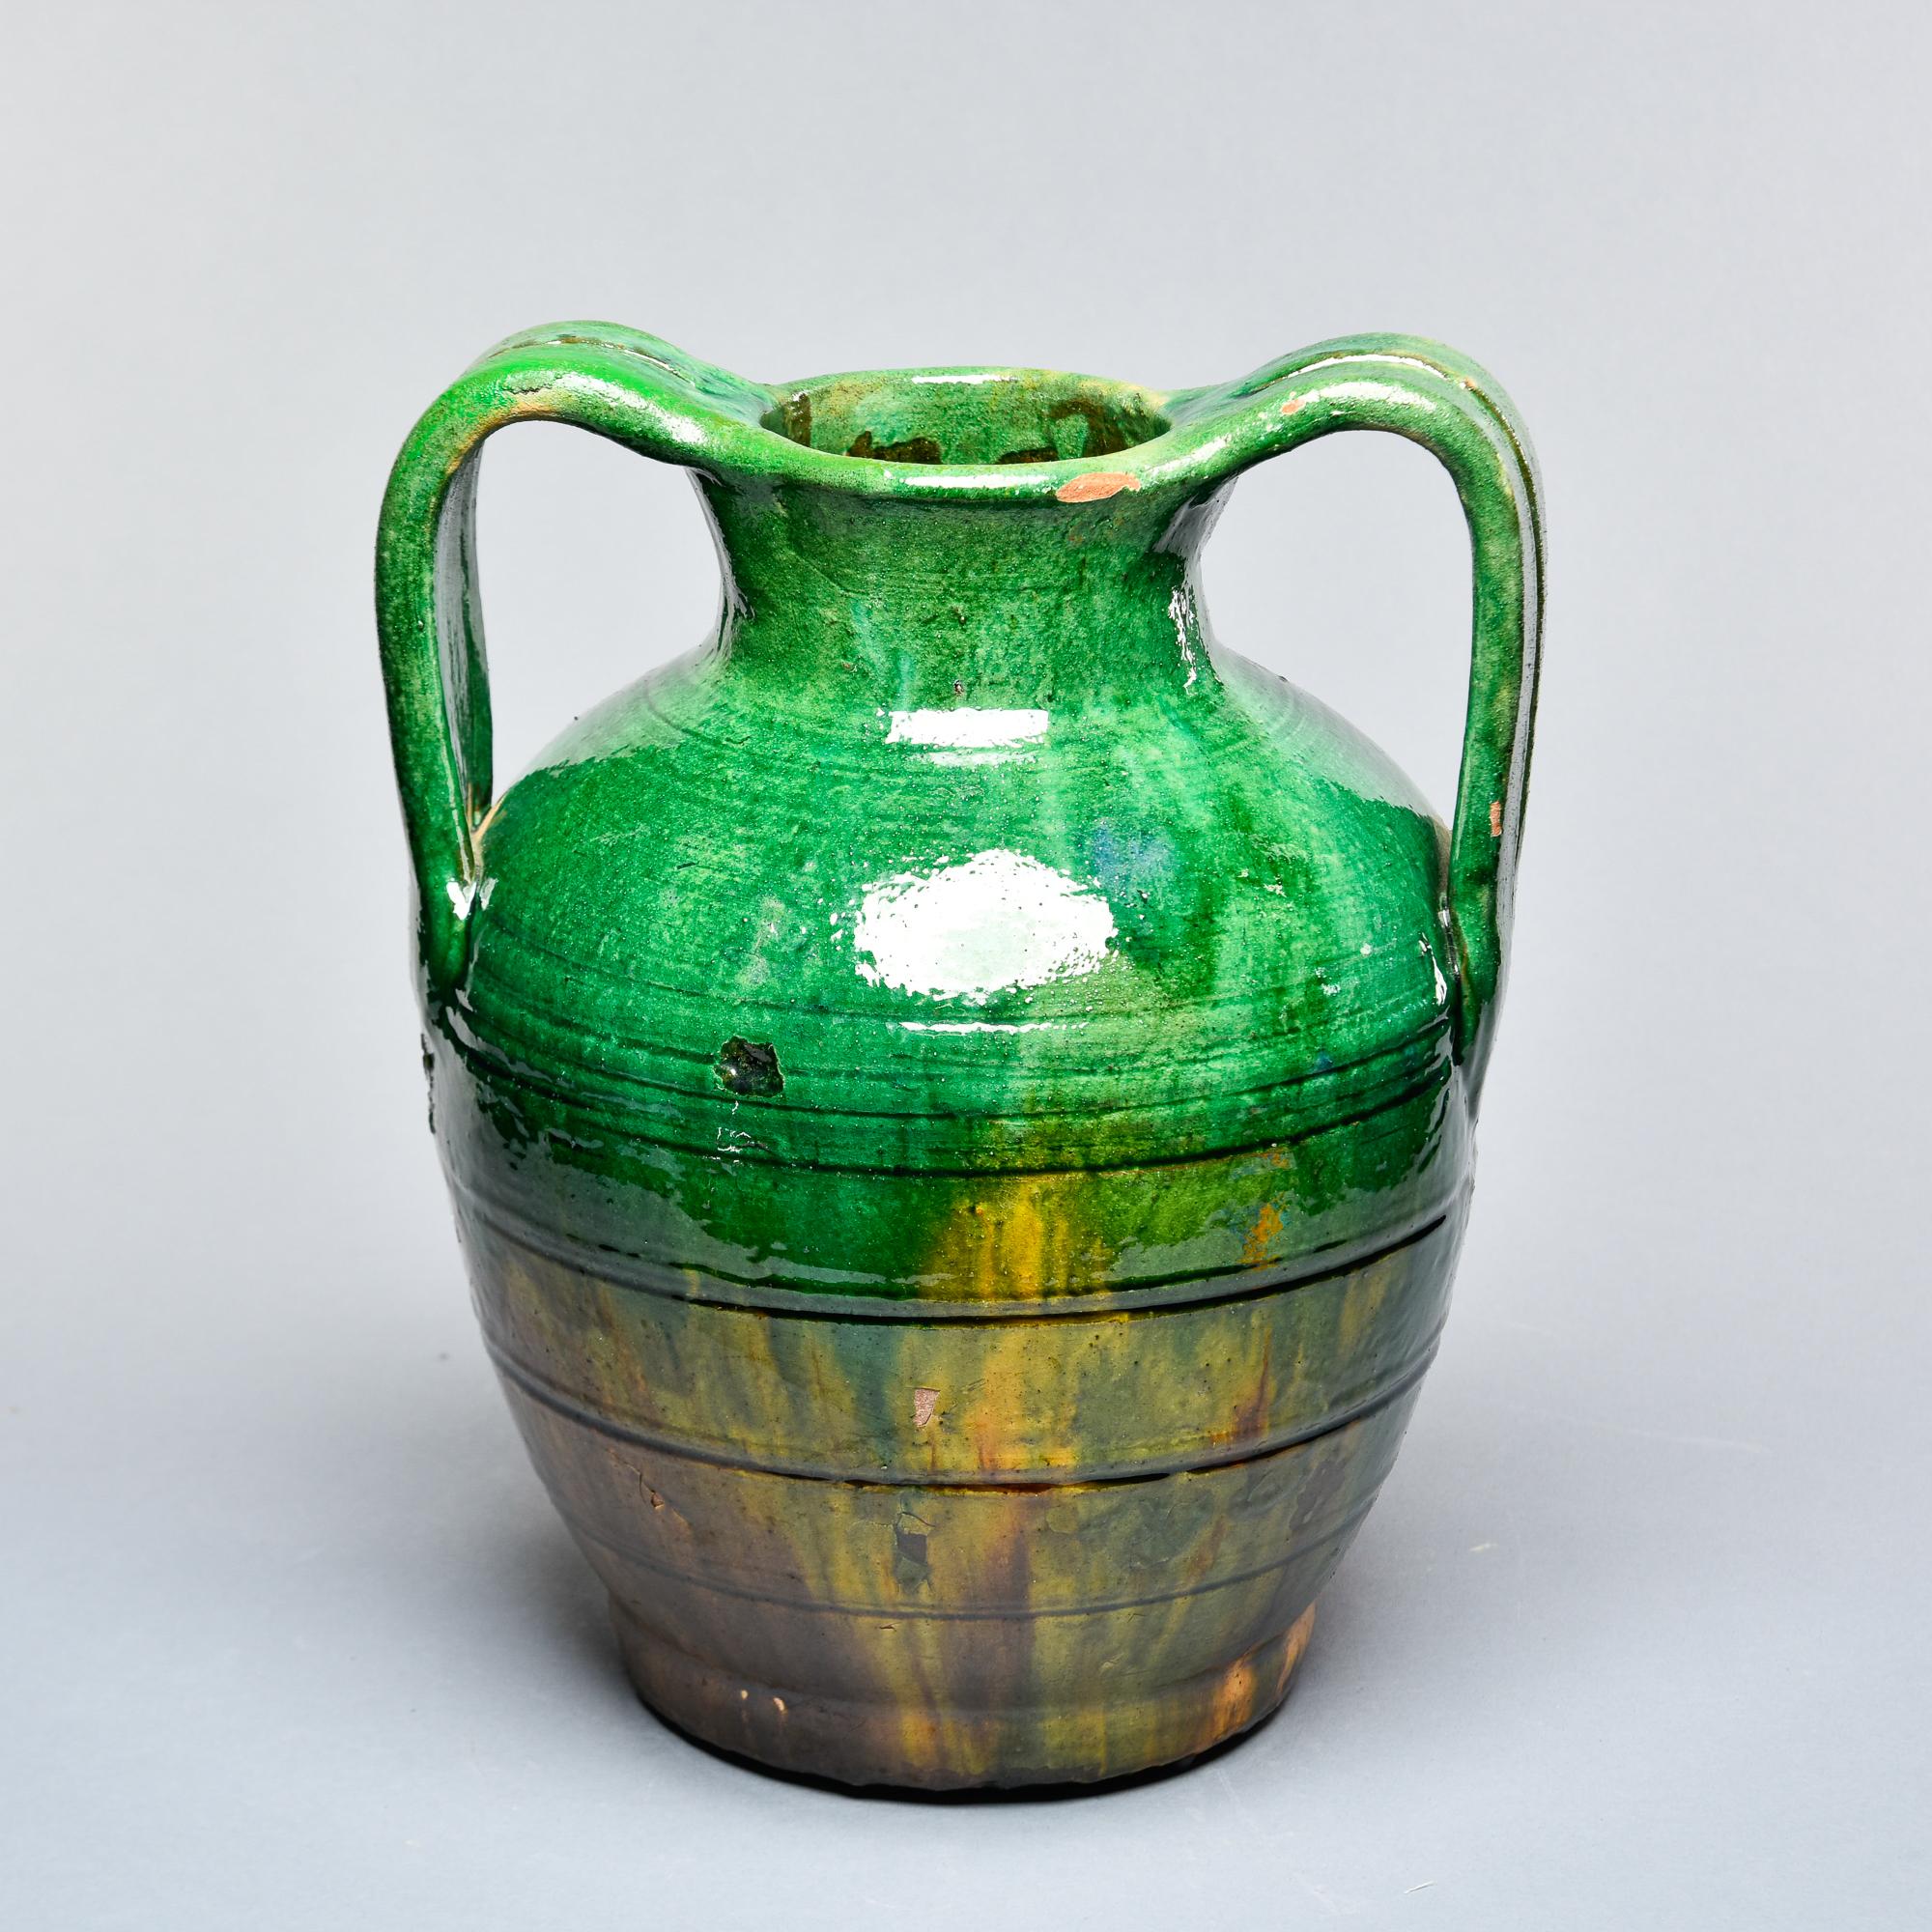 Found in France, this circa 1910 traditional rustic French pot has two curved handles and a jade green glaze with mustard gold under glaze. Some scattered wear with flakes to glaze but no repairs or structural issues. Unknown maker. Several